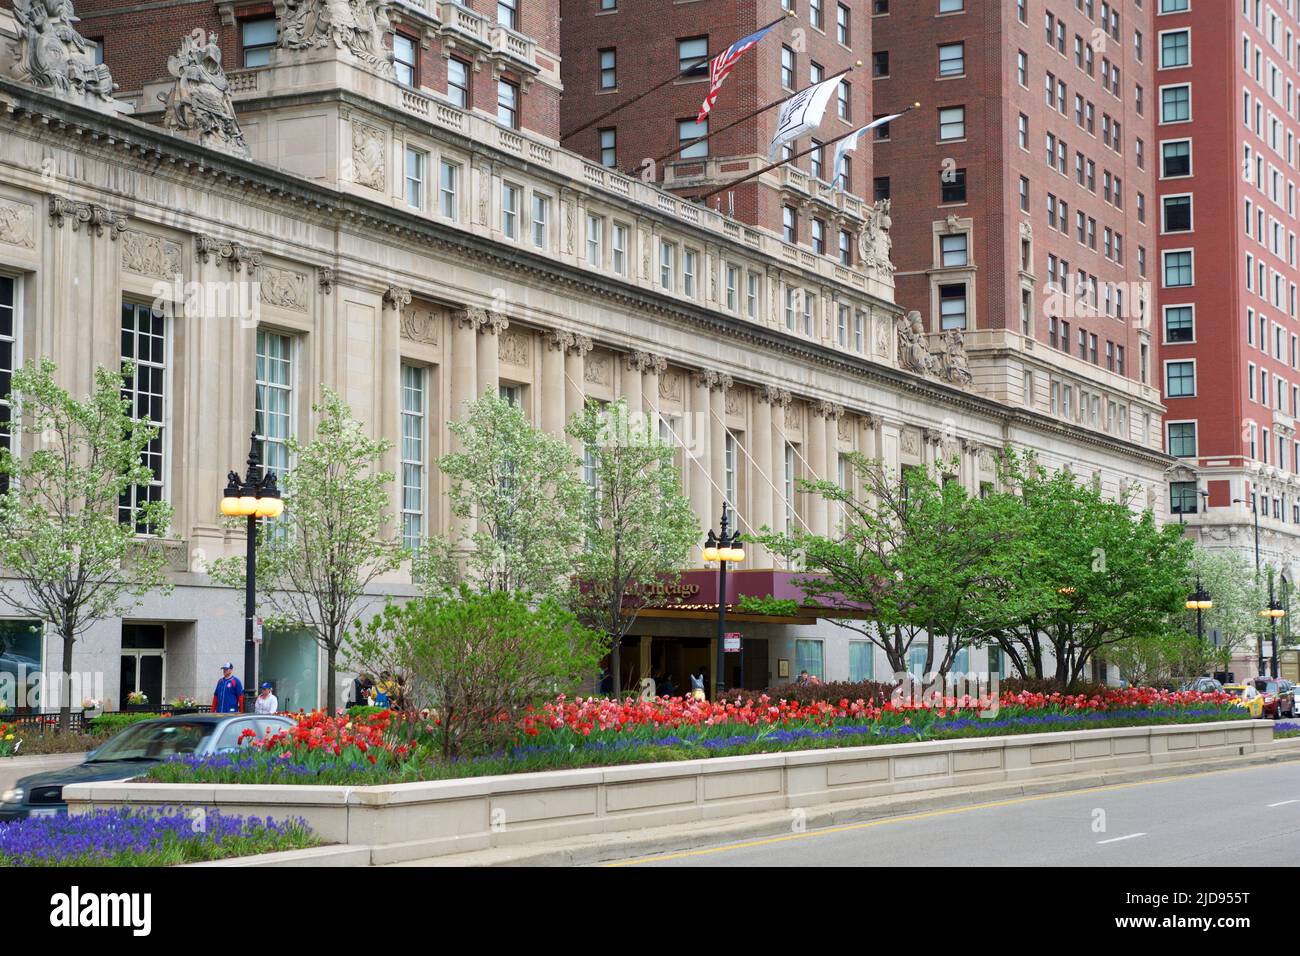 CHICAGO, ILLINOIS, UNITED STATES - 12 May 2018: Exterior view of the Hilton Chicago. Stock Photo